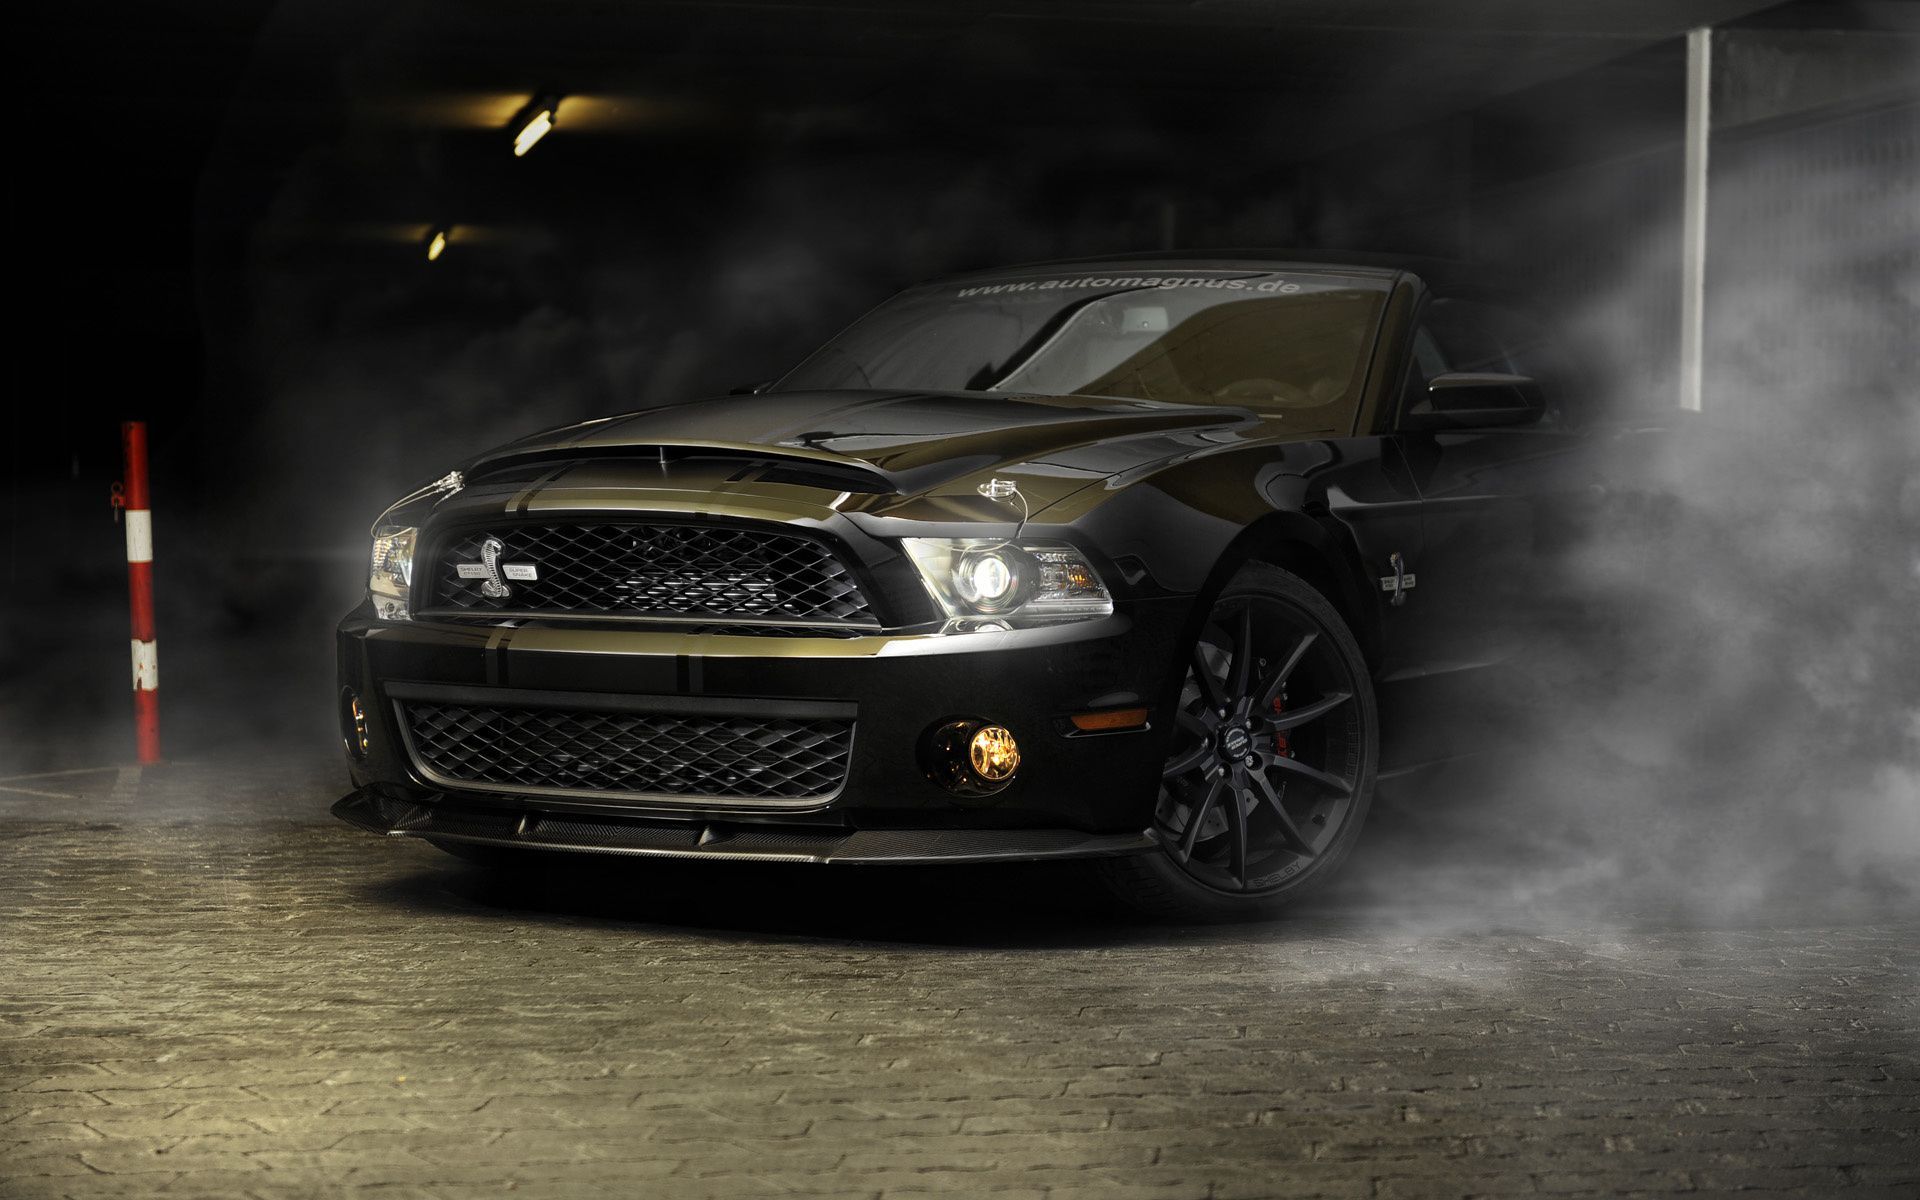 Ford Wallpapers on Pinterest | Ford Mustangs, Mustangs and Ford ...